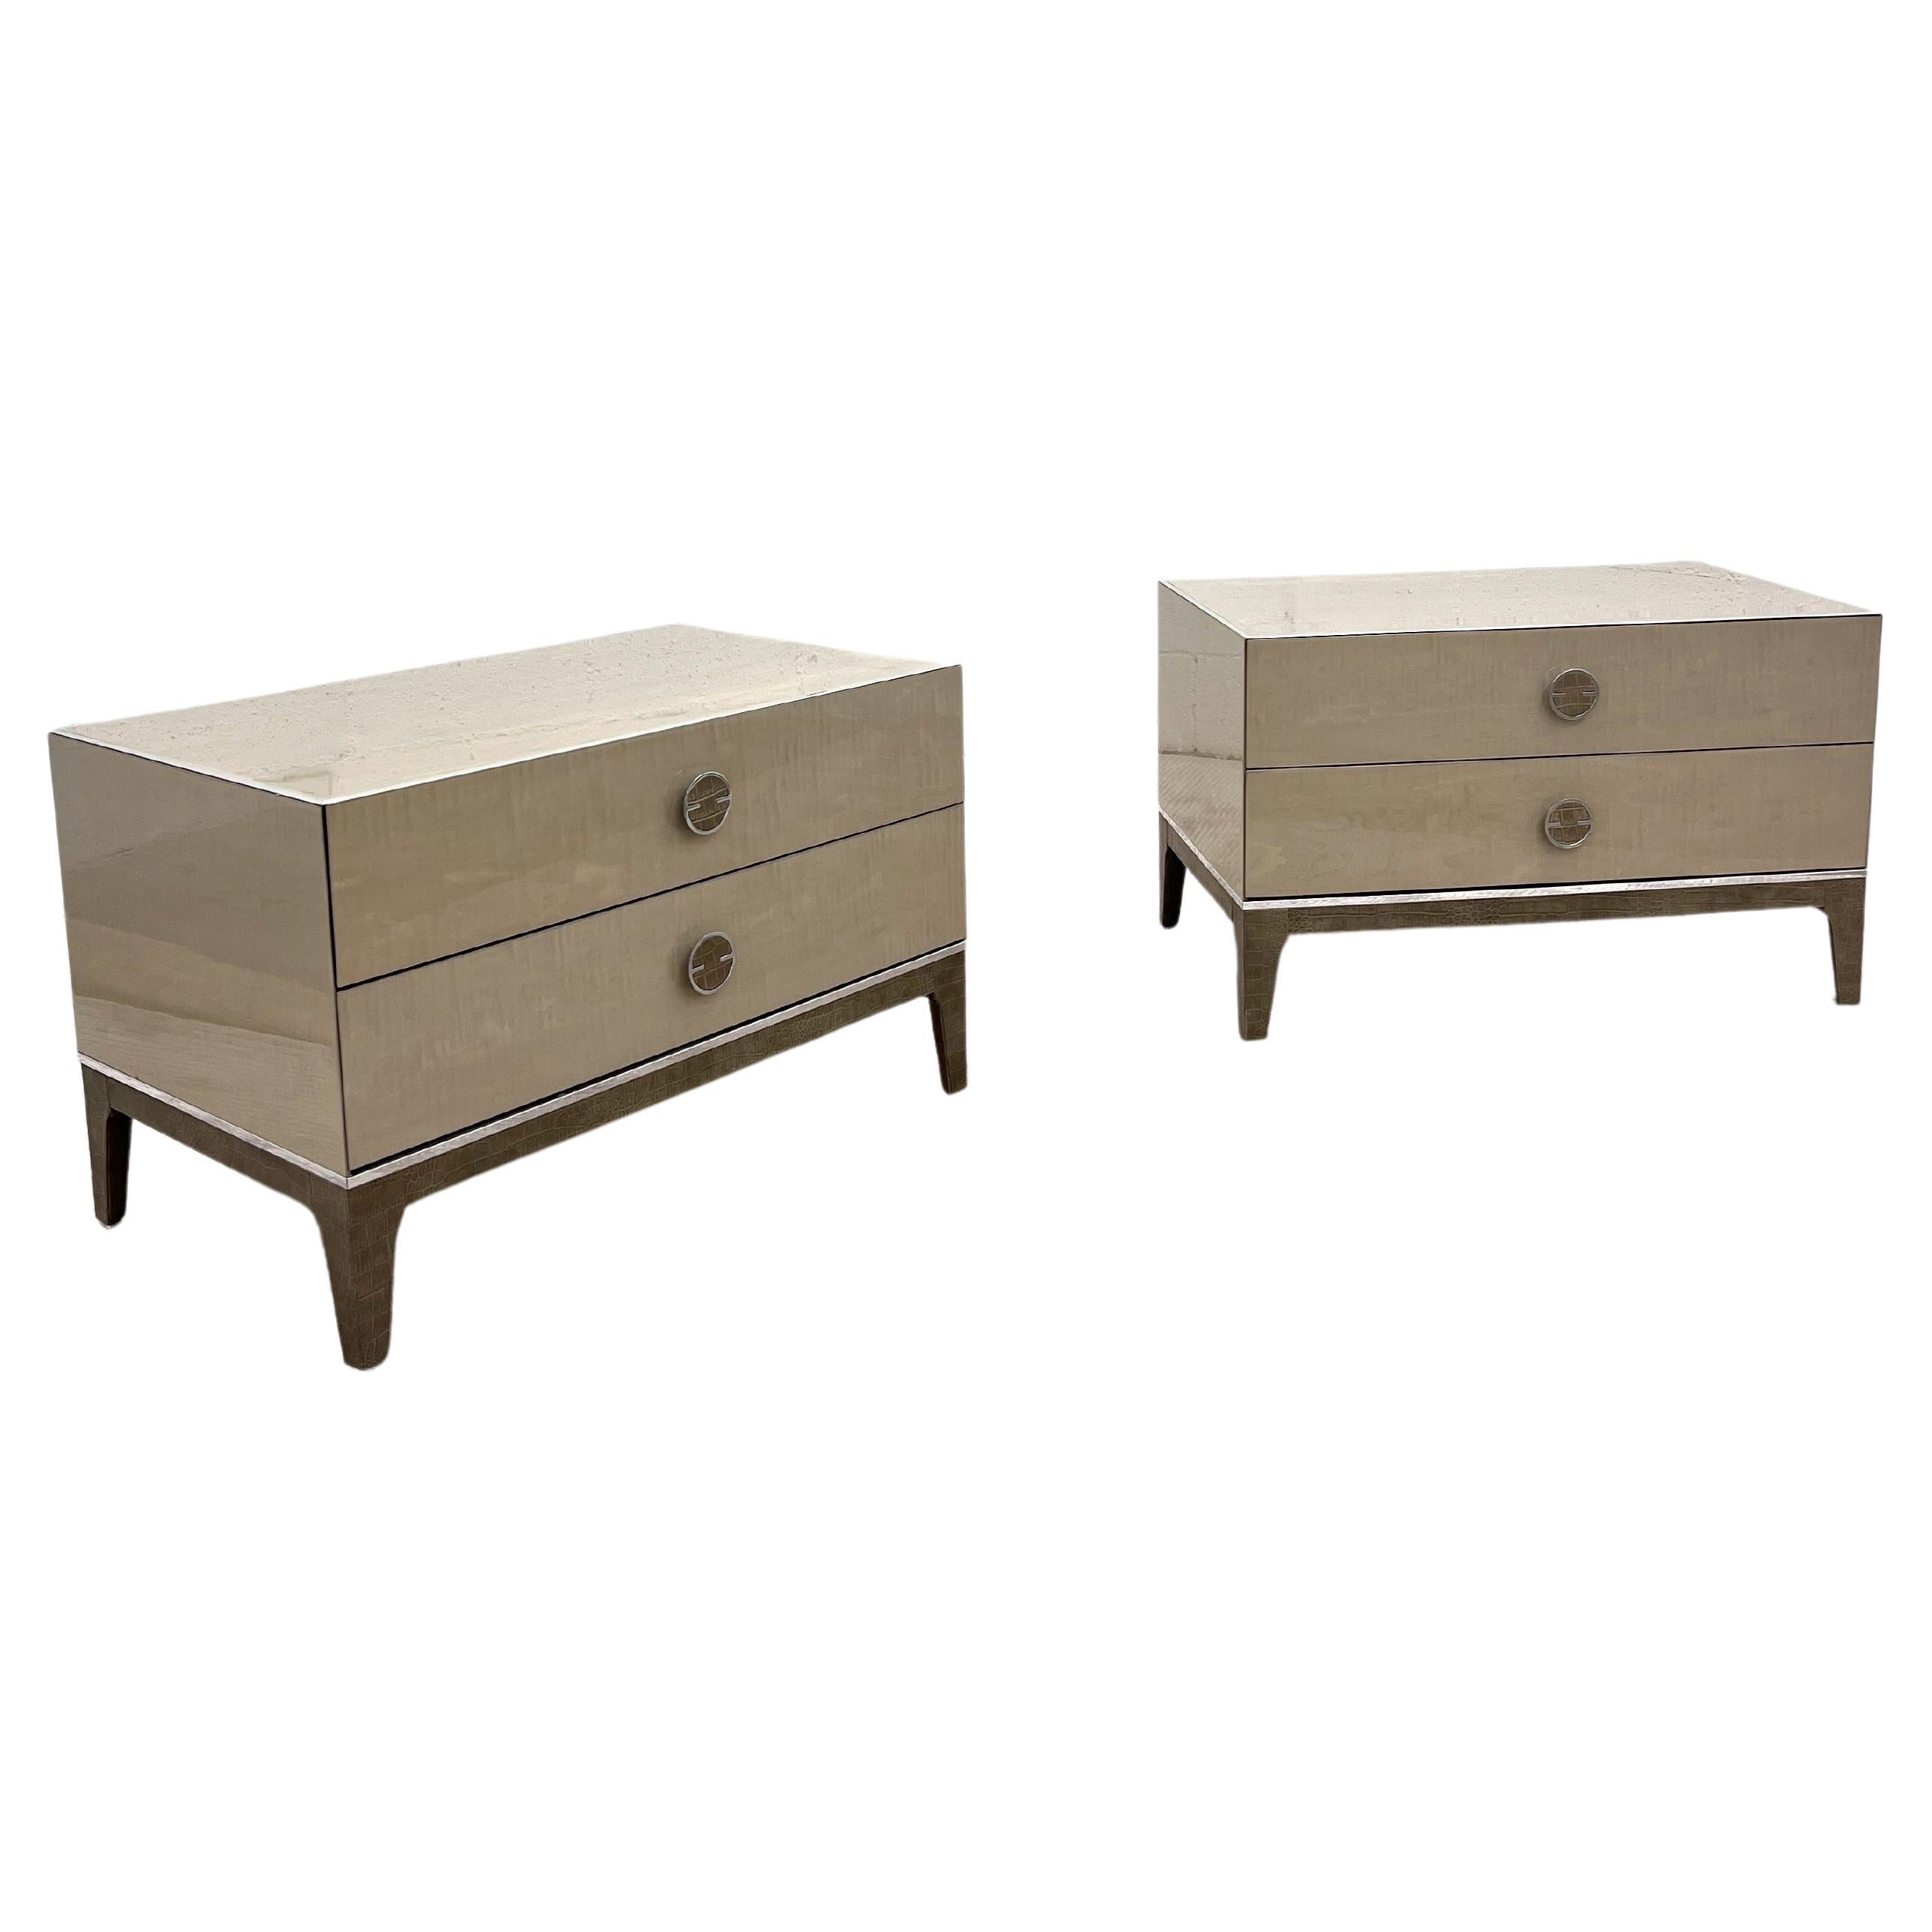 Cantoni Taupe, leather, and chrome contemporary Italian minimalistic nightstands